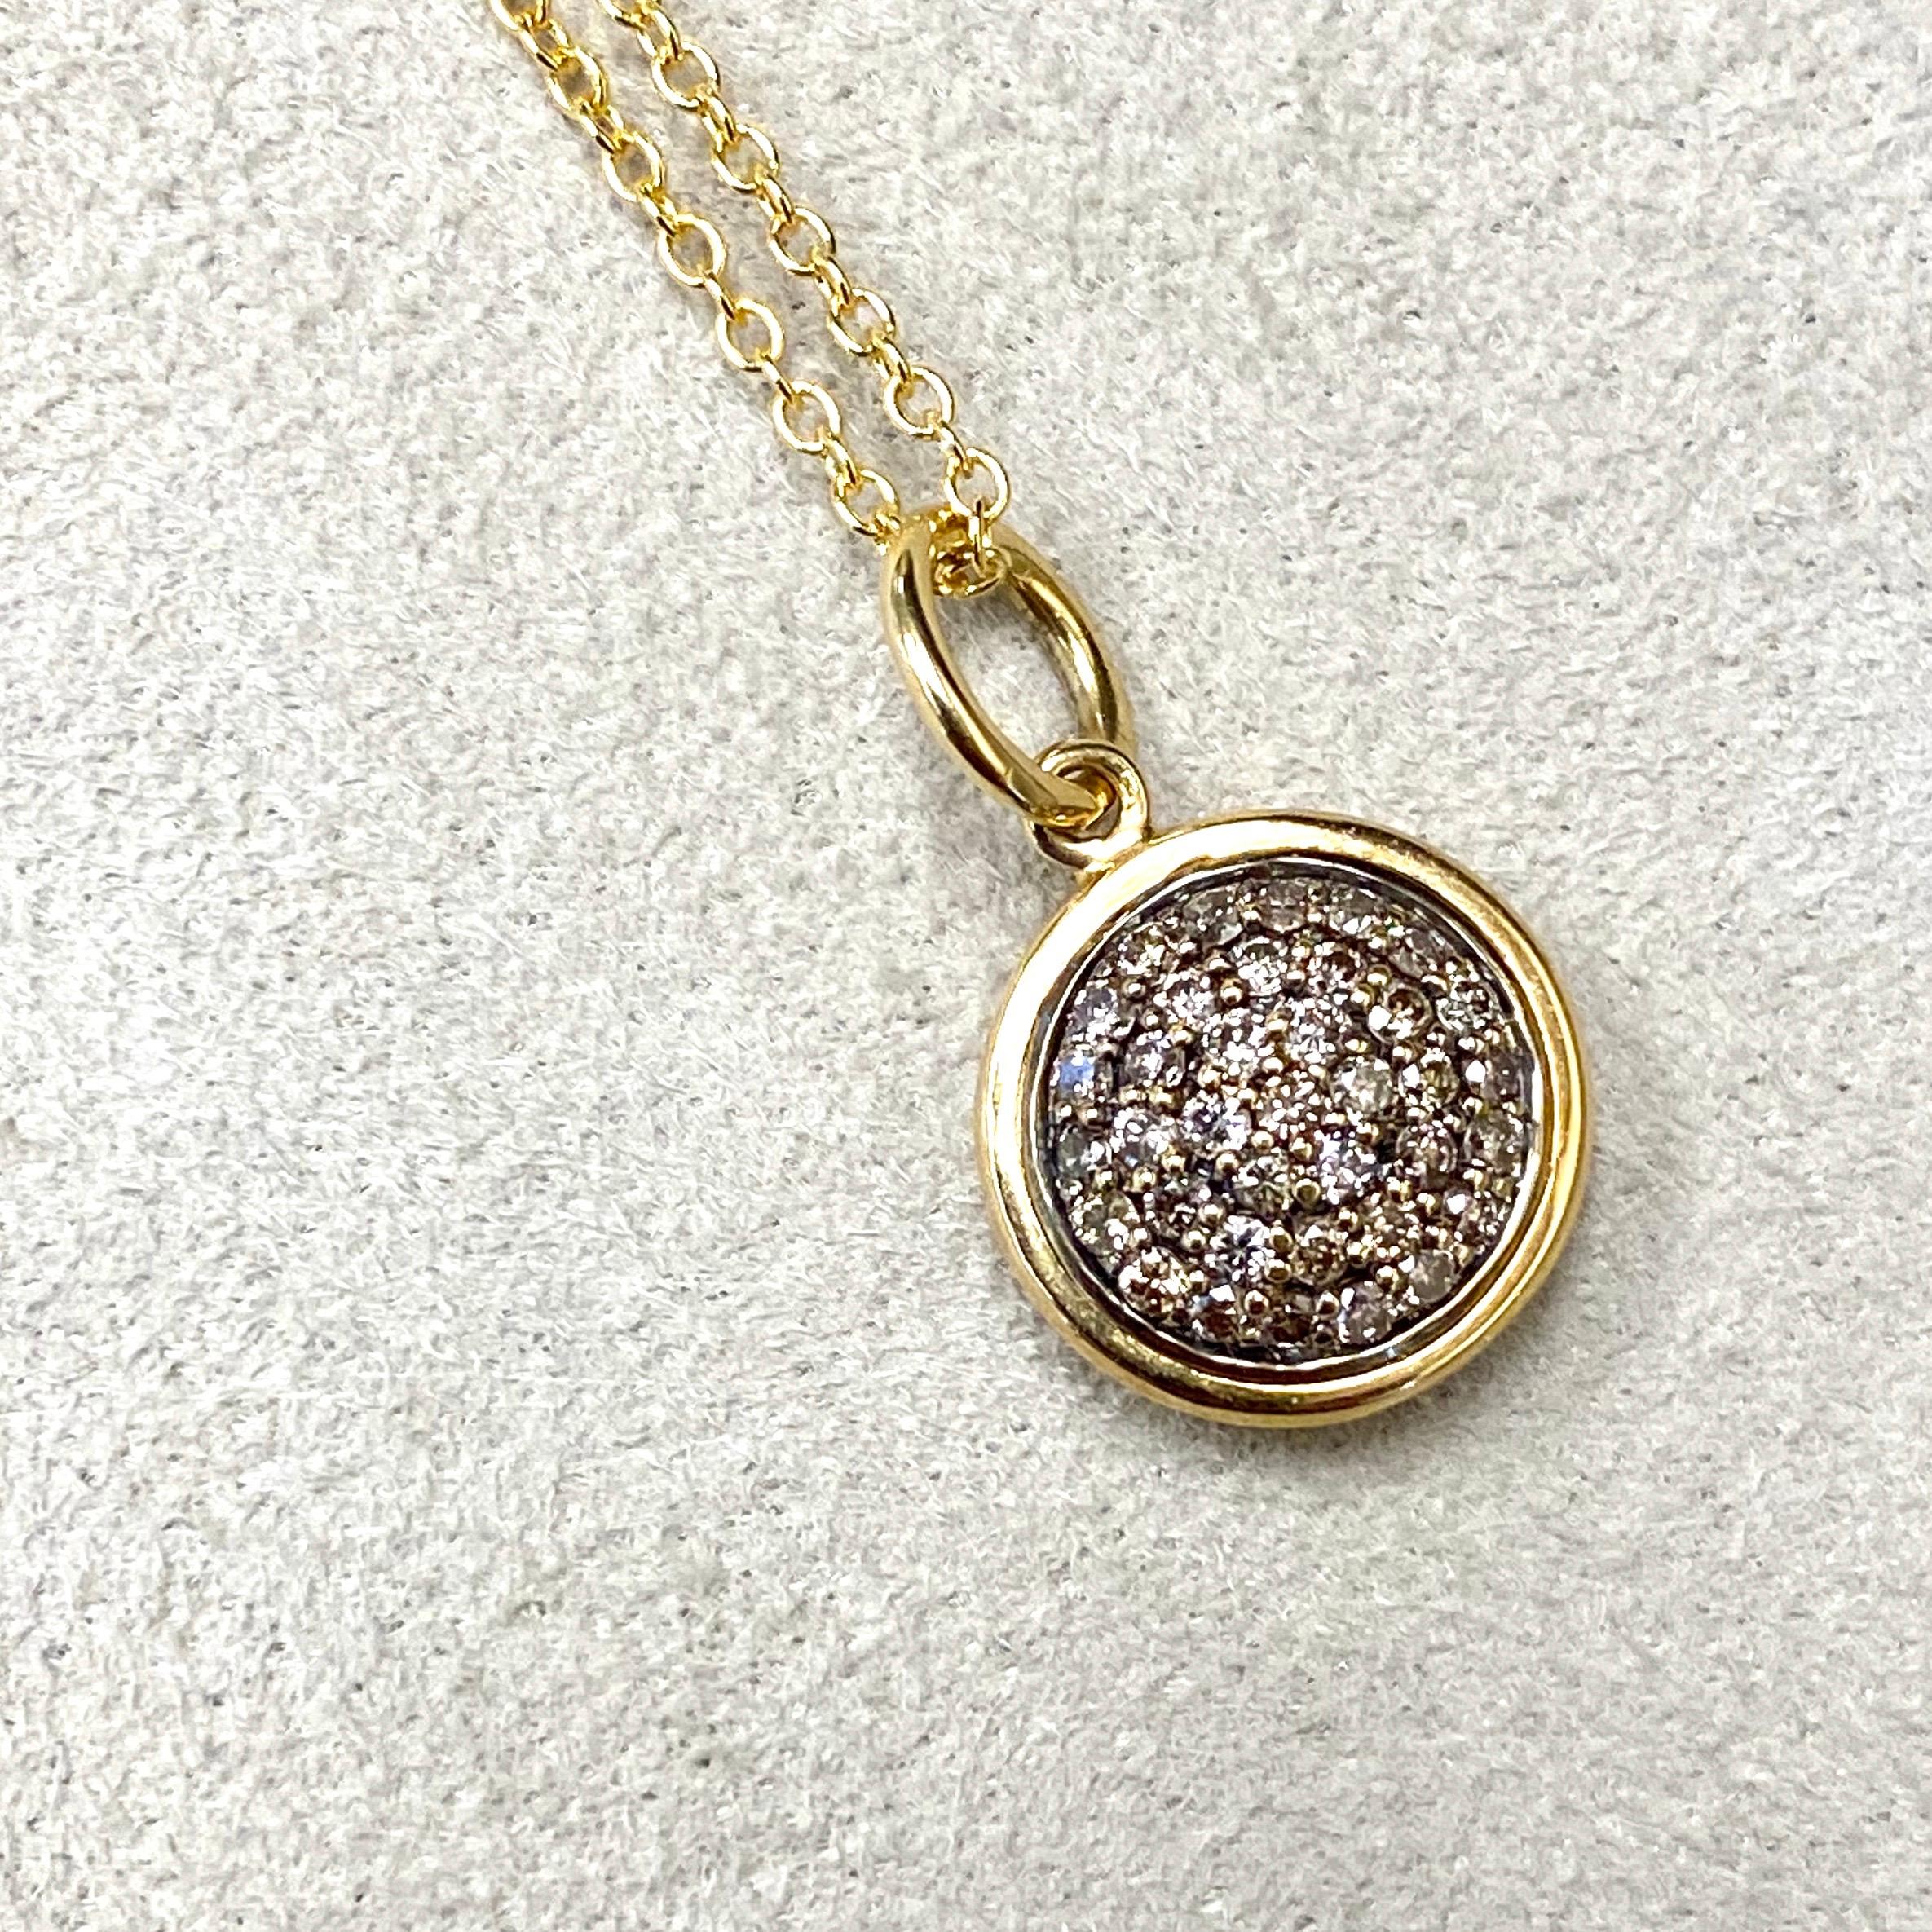 Created in 18 karat yellow gold
10 mm size charm
Brown Diamonds 0.30 ct approx
Chain sold separately 

This gorgeous 18 karat yellow gold variation of our pendant is a delicately crafted 10 mm emblem, encrusted with shimmering brown diamonds